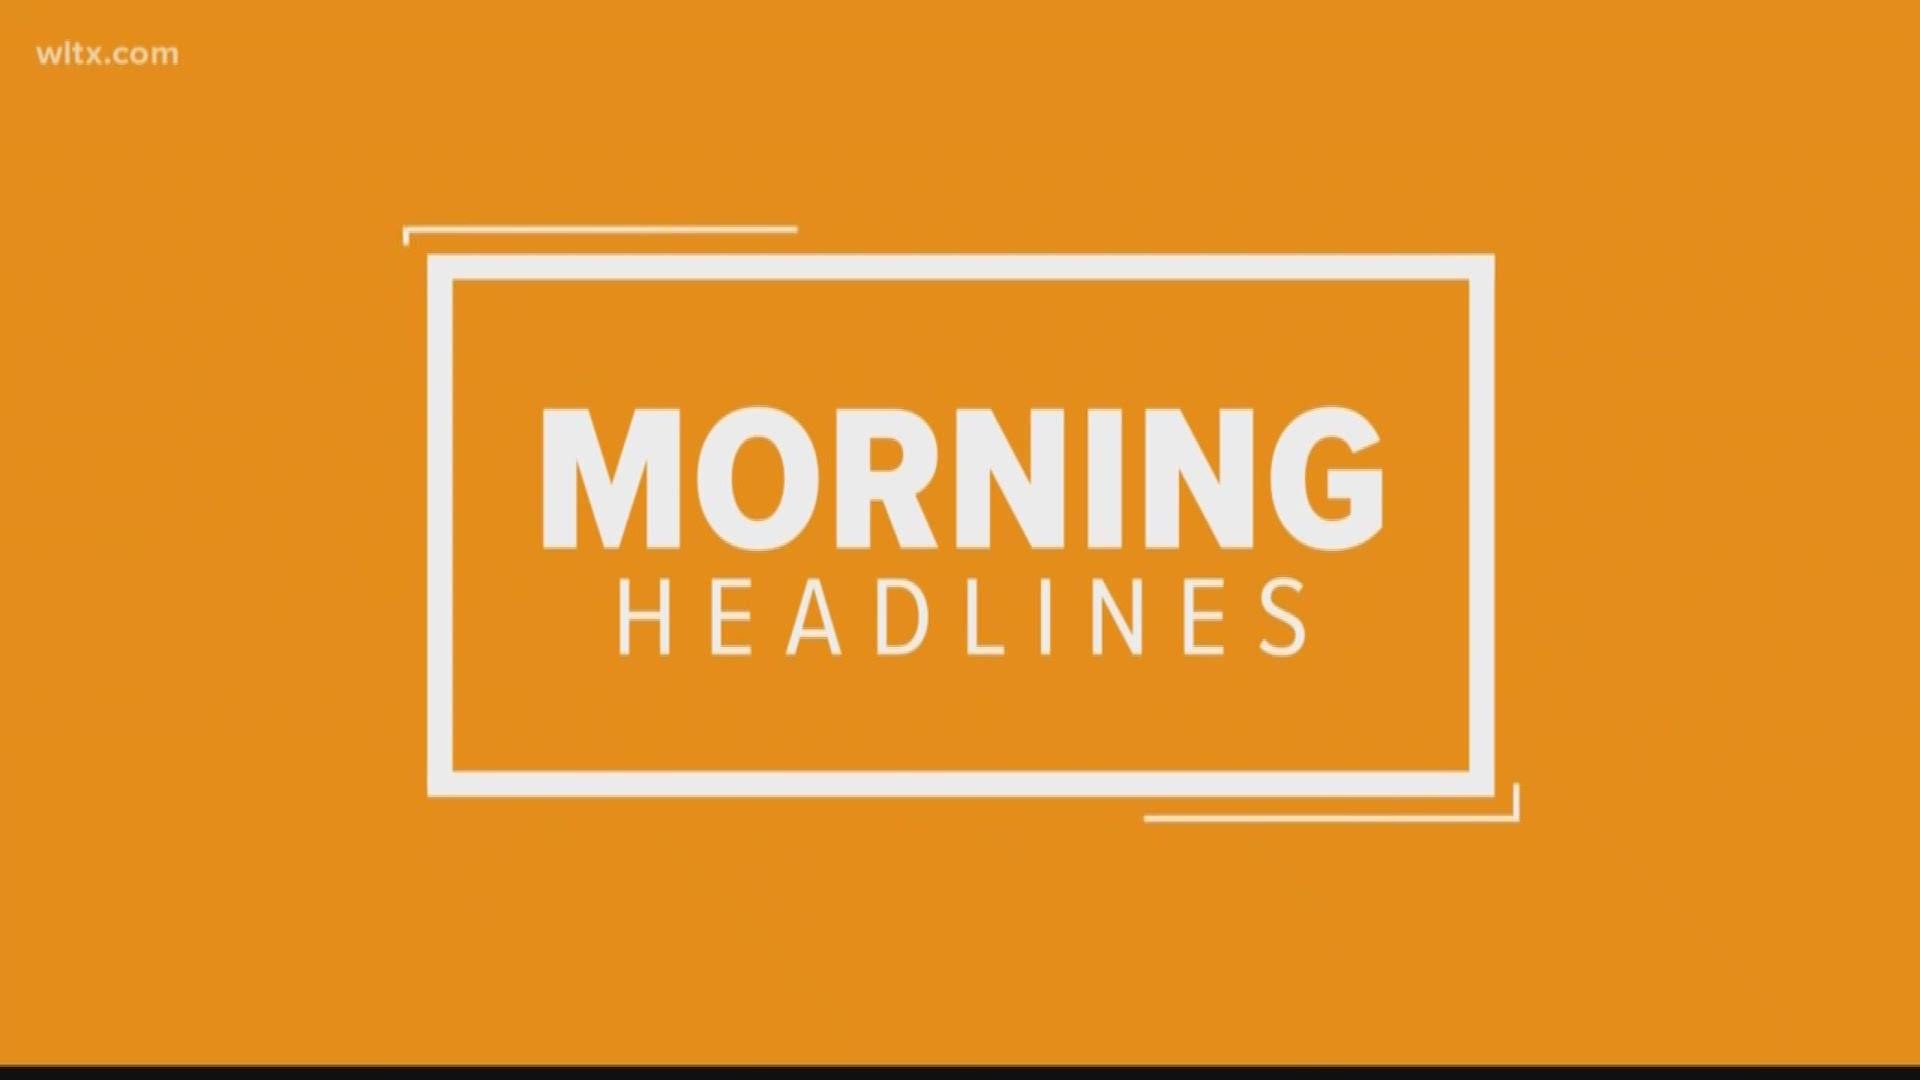 Thursday Morning Headlines and weather update from News19 This Morning for January 17, 2019.